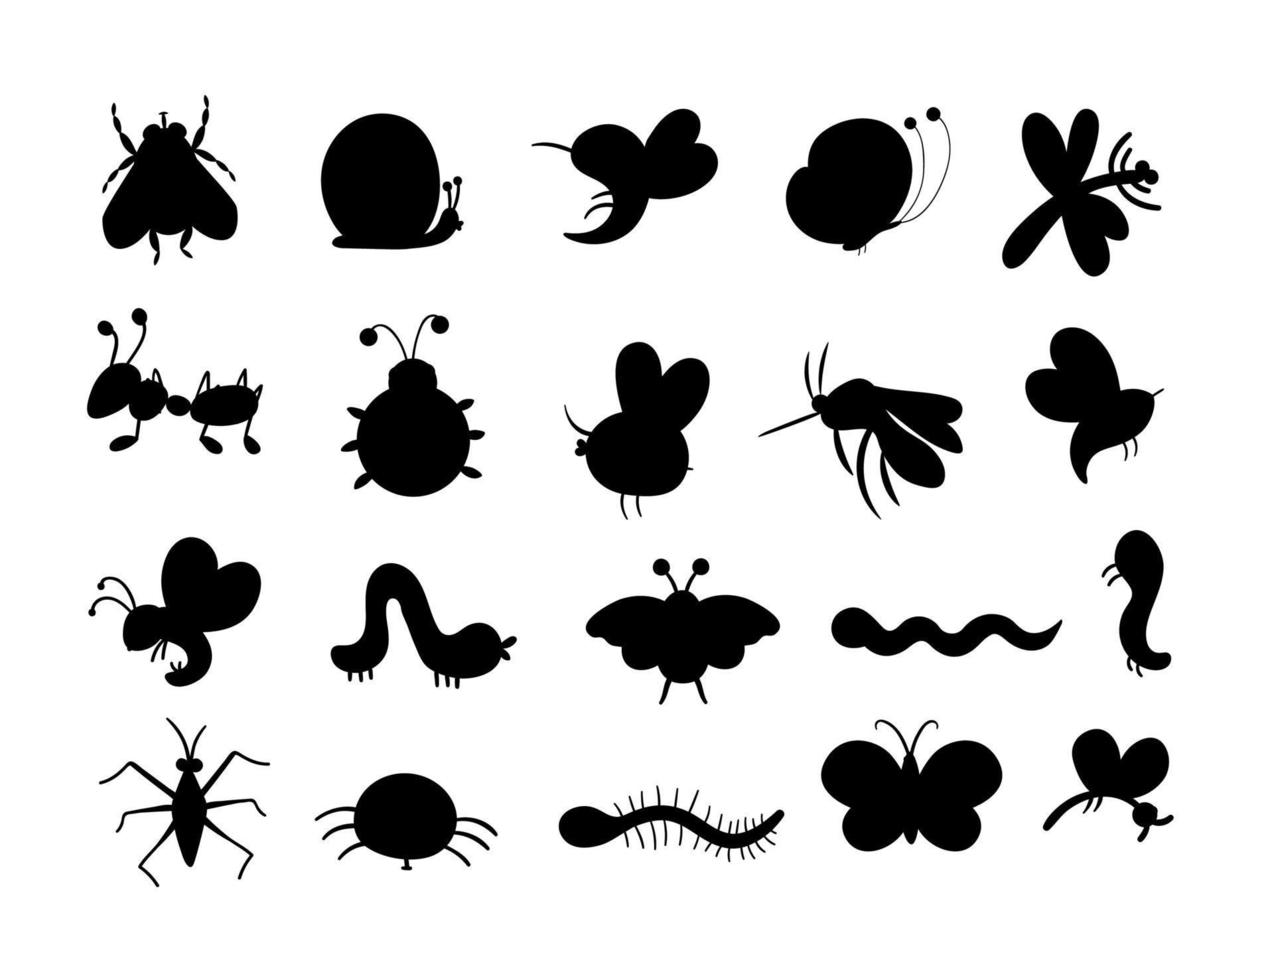 Set of vector hand drawn flat insects silhouettes. Funny bugs collection. Cute forest illustration with butterflies, bees, caterpillars for children design, print, stationery